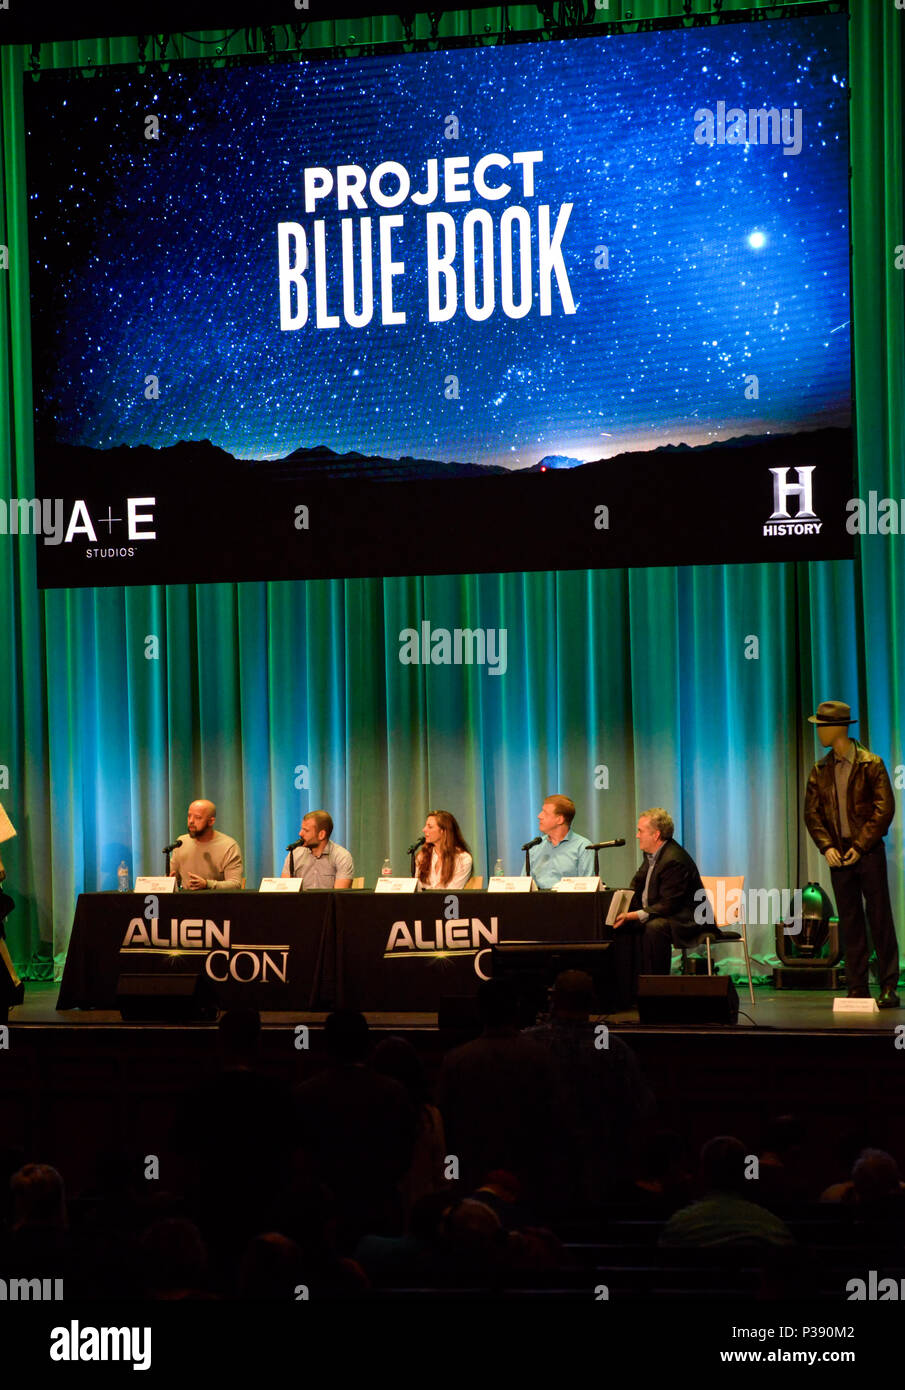 Pasadena, California, June 16, 2018, Sean Jablonski David Oâ€™Leary, Jackie Levine, Paul Hynek and moderator: Arturo Interian hold a discussion History Chanels new Show, Project Blue Book at AlienCon day 2. Credit: Ken Howard Images/Alamy Live News Stock Photo